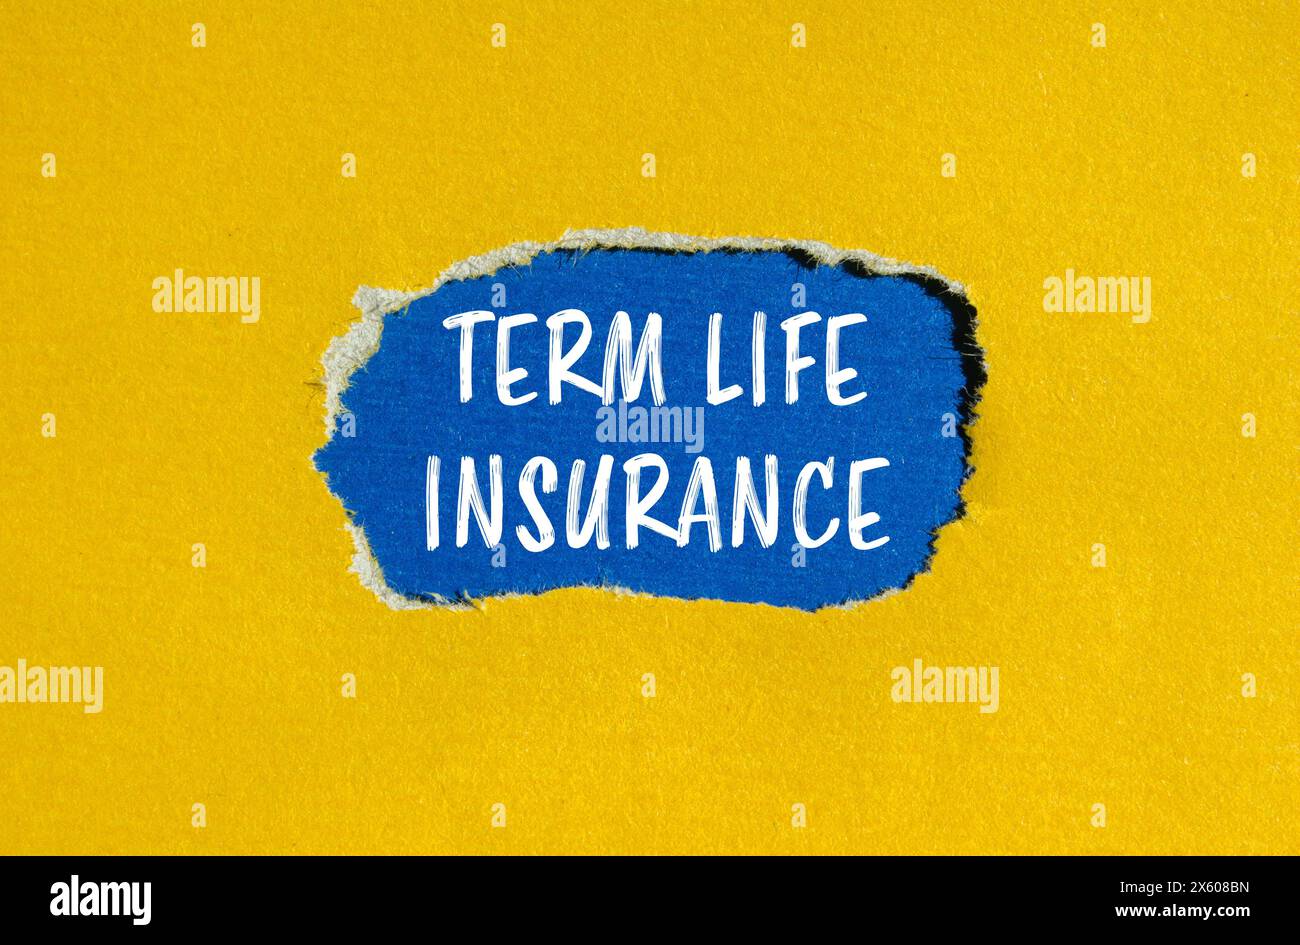 Term life insurance words written on ripped yellow paper with blue background. Conceptual term life insurance symbol. Copy space. Stock Photo